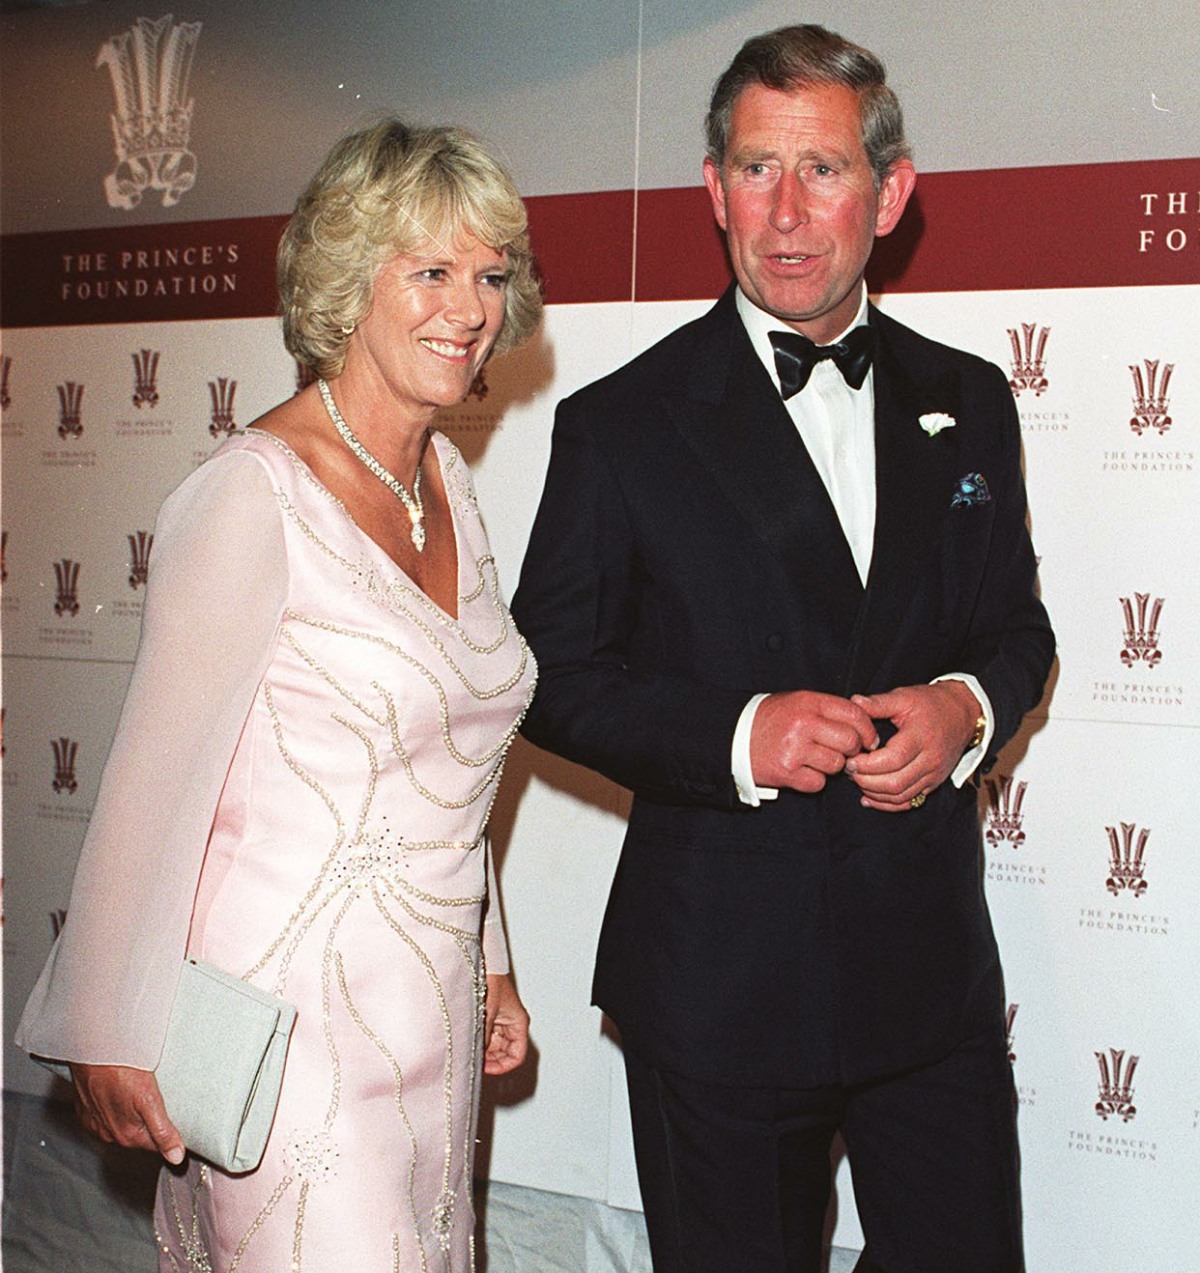 HRH THE PRINCE OF WALESand Mrs CAMILLA PARKER BOWLESAttending a Gala Dinner in honour of the Prince's Foundation at the Foundation's headquarters in Charlotte Street, ShoreditchCOMPULSORY CREDIT: UPPA/Photoshot PhotoUGL 017469/D-24   20.06.2000